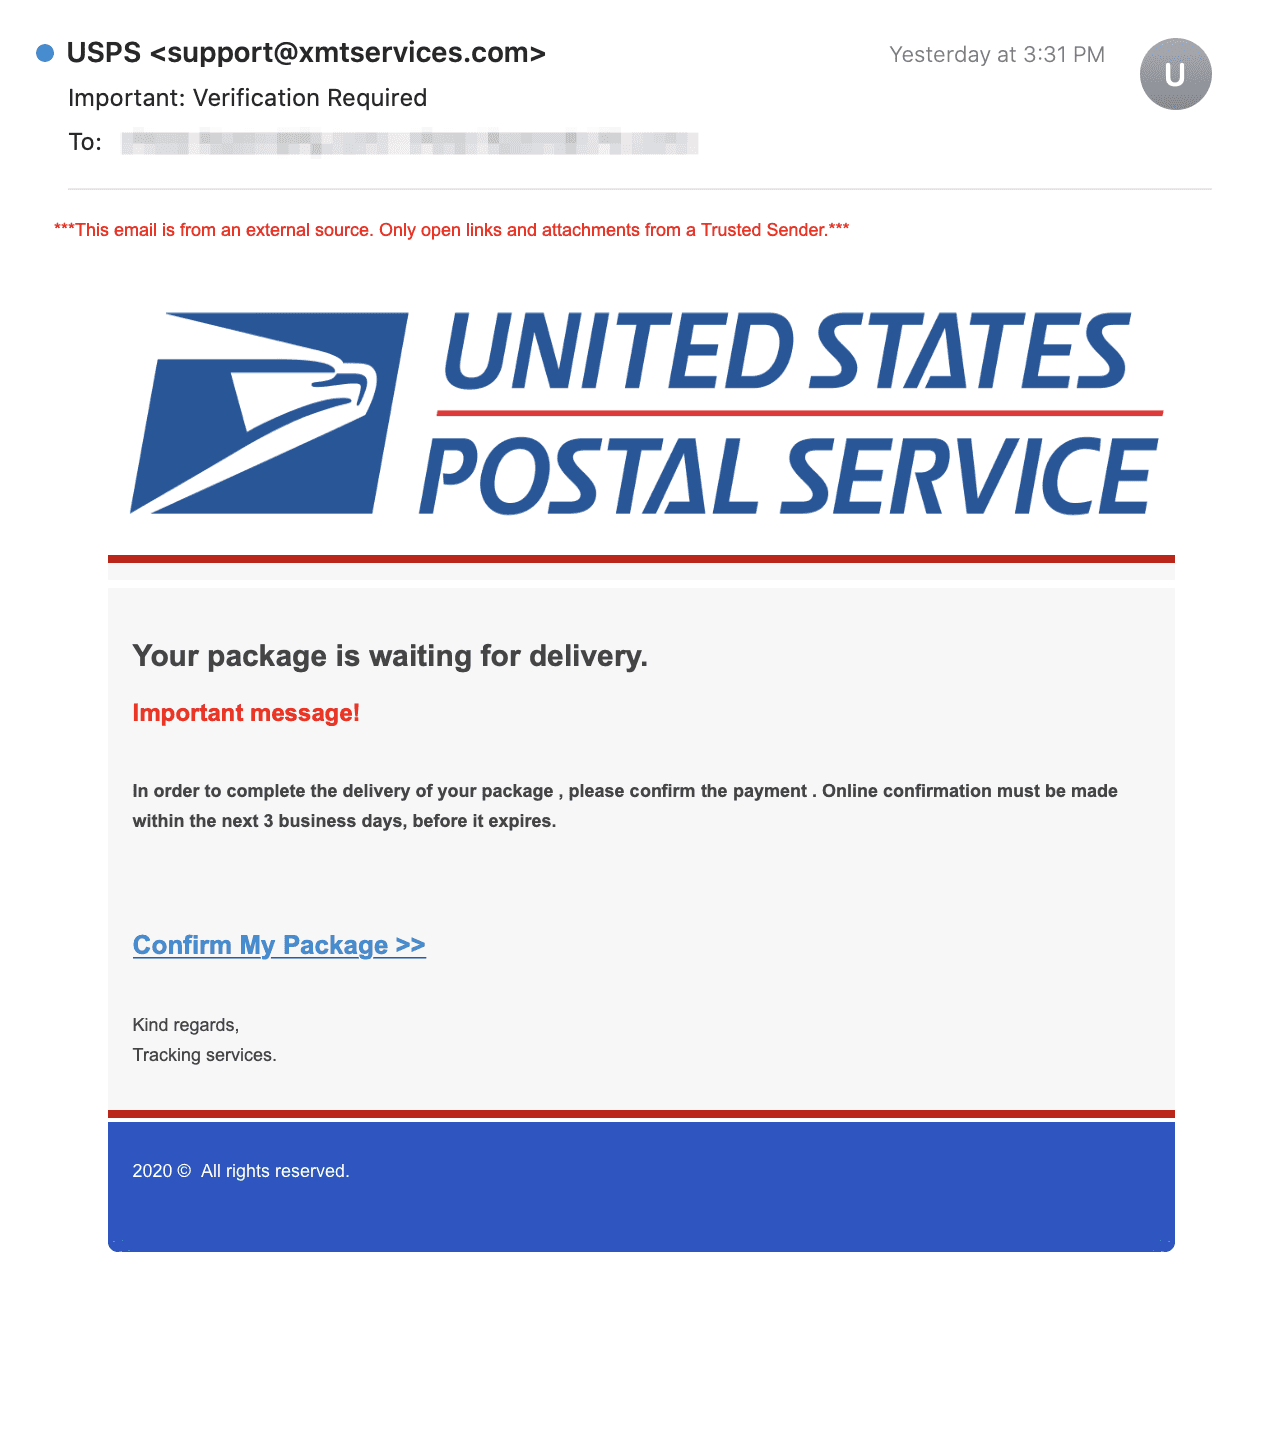 USPS phishing scam email